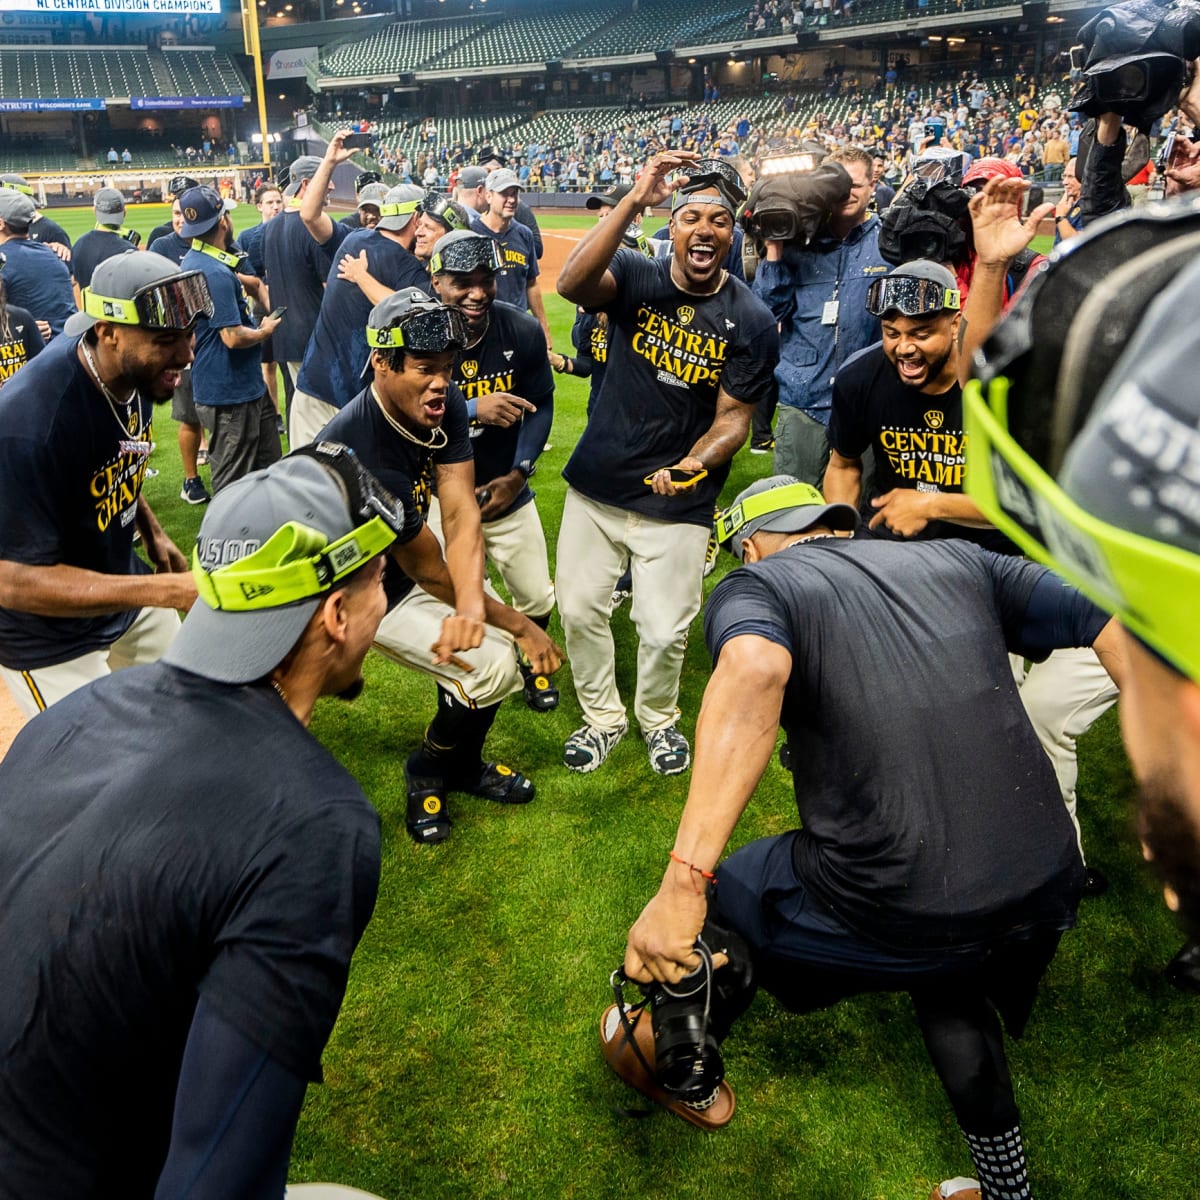 The Brew Crew Ball Weekly Mailbag is back! - BVM Sports